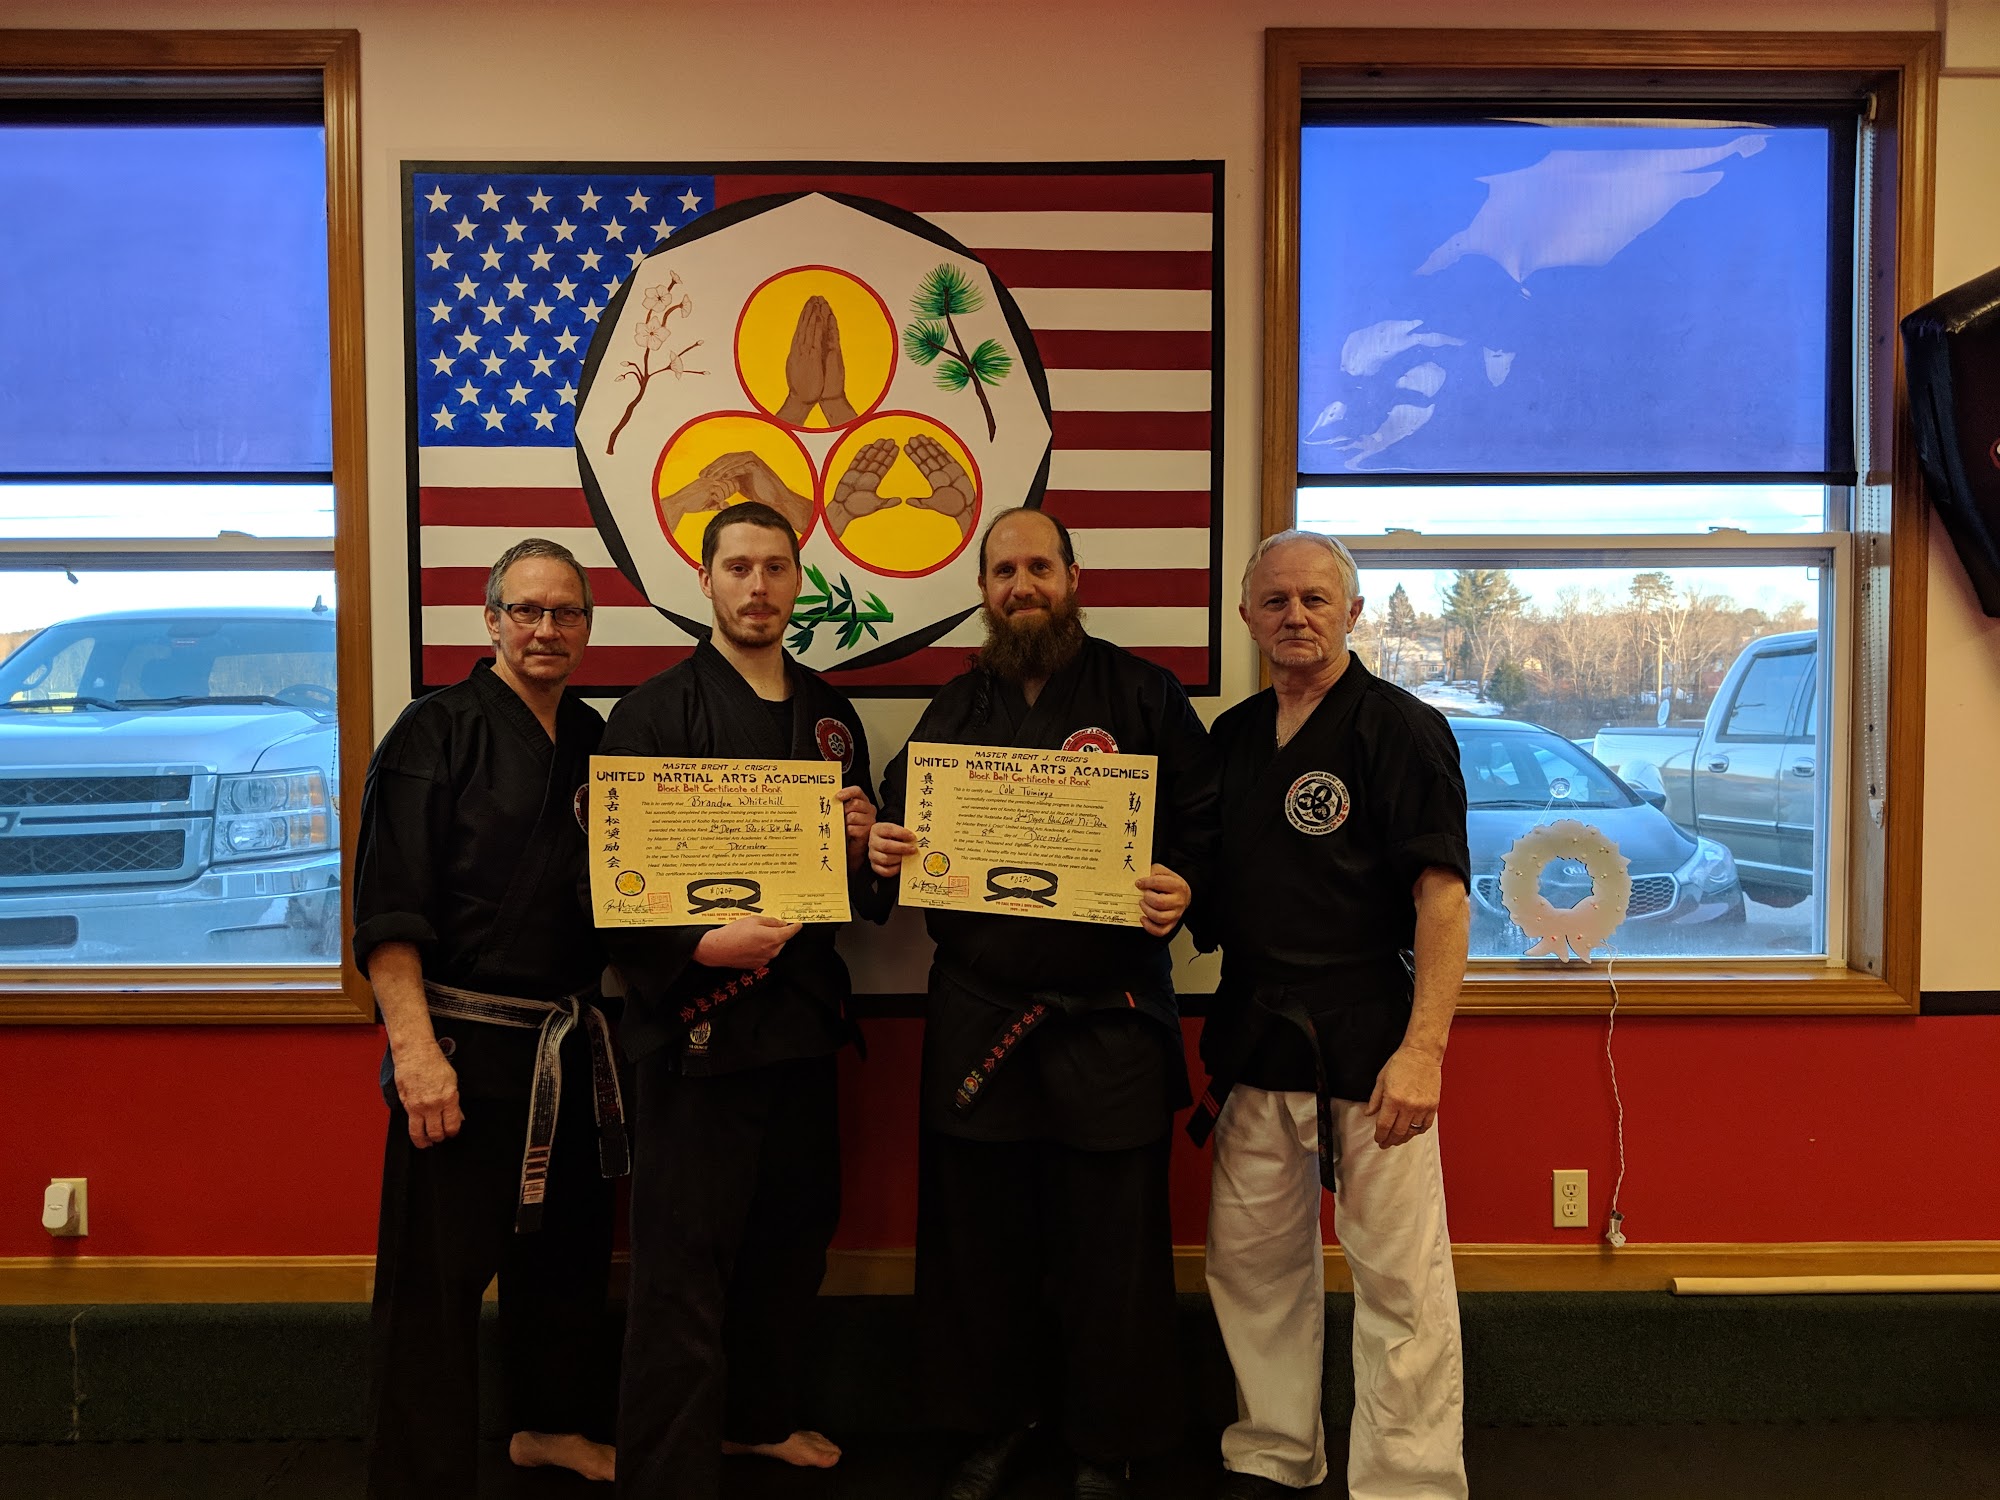 United Fitness & Martial Arts 186 ME-133, Winthrop Maine 04364